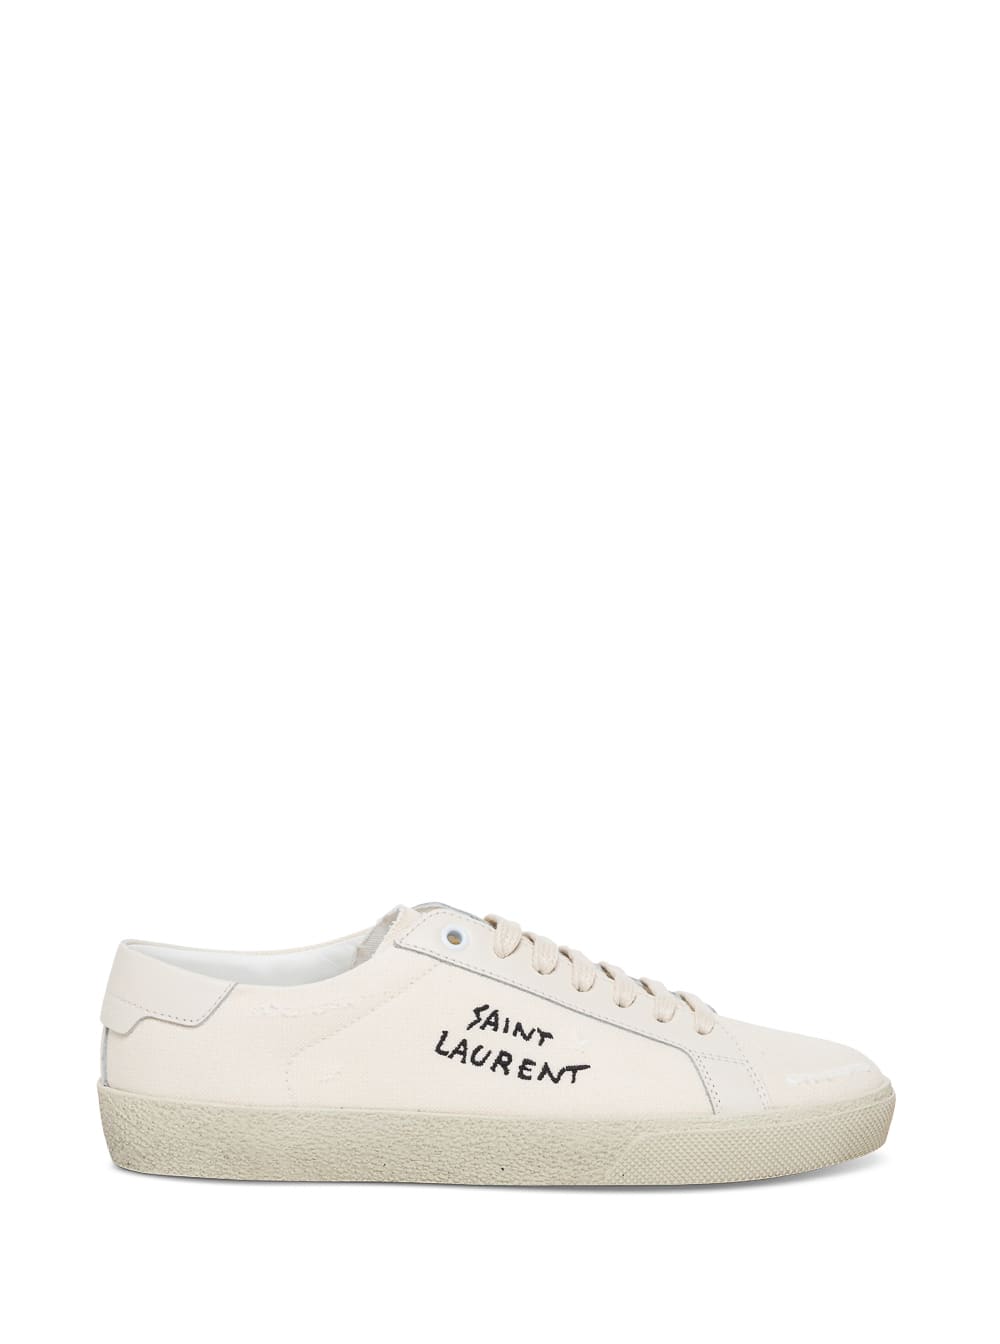 Sl / 06 Signature White Leather And Cotton Sneakers Saint Laurent Woman